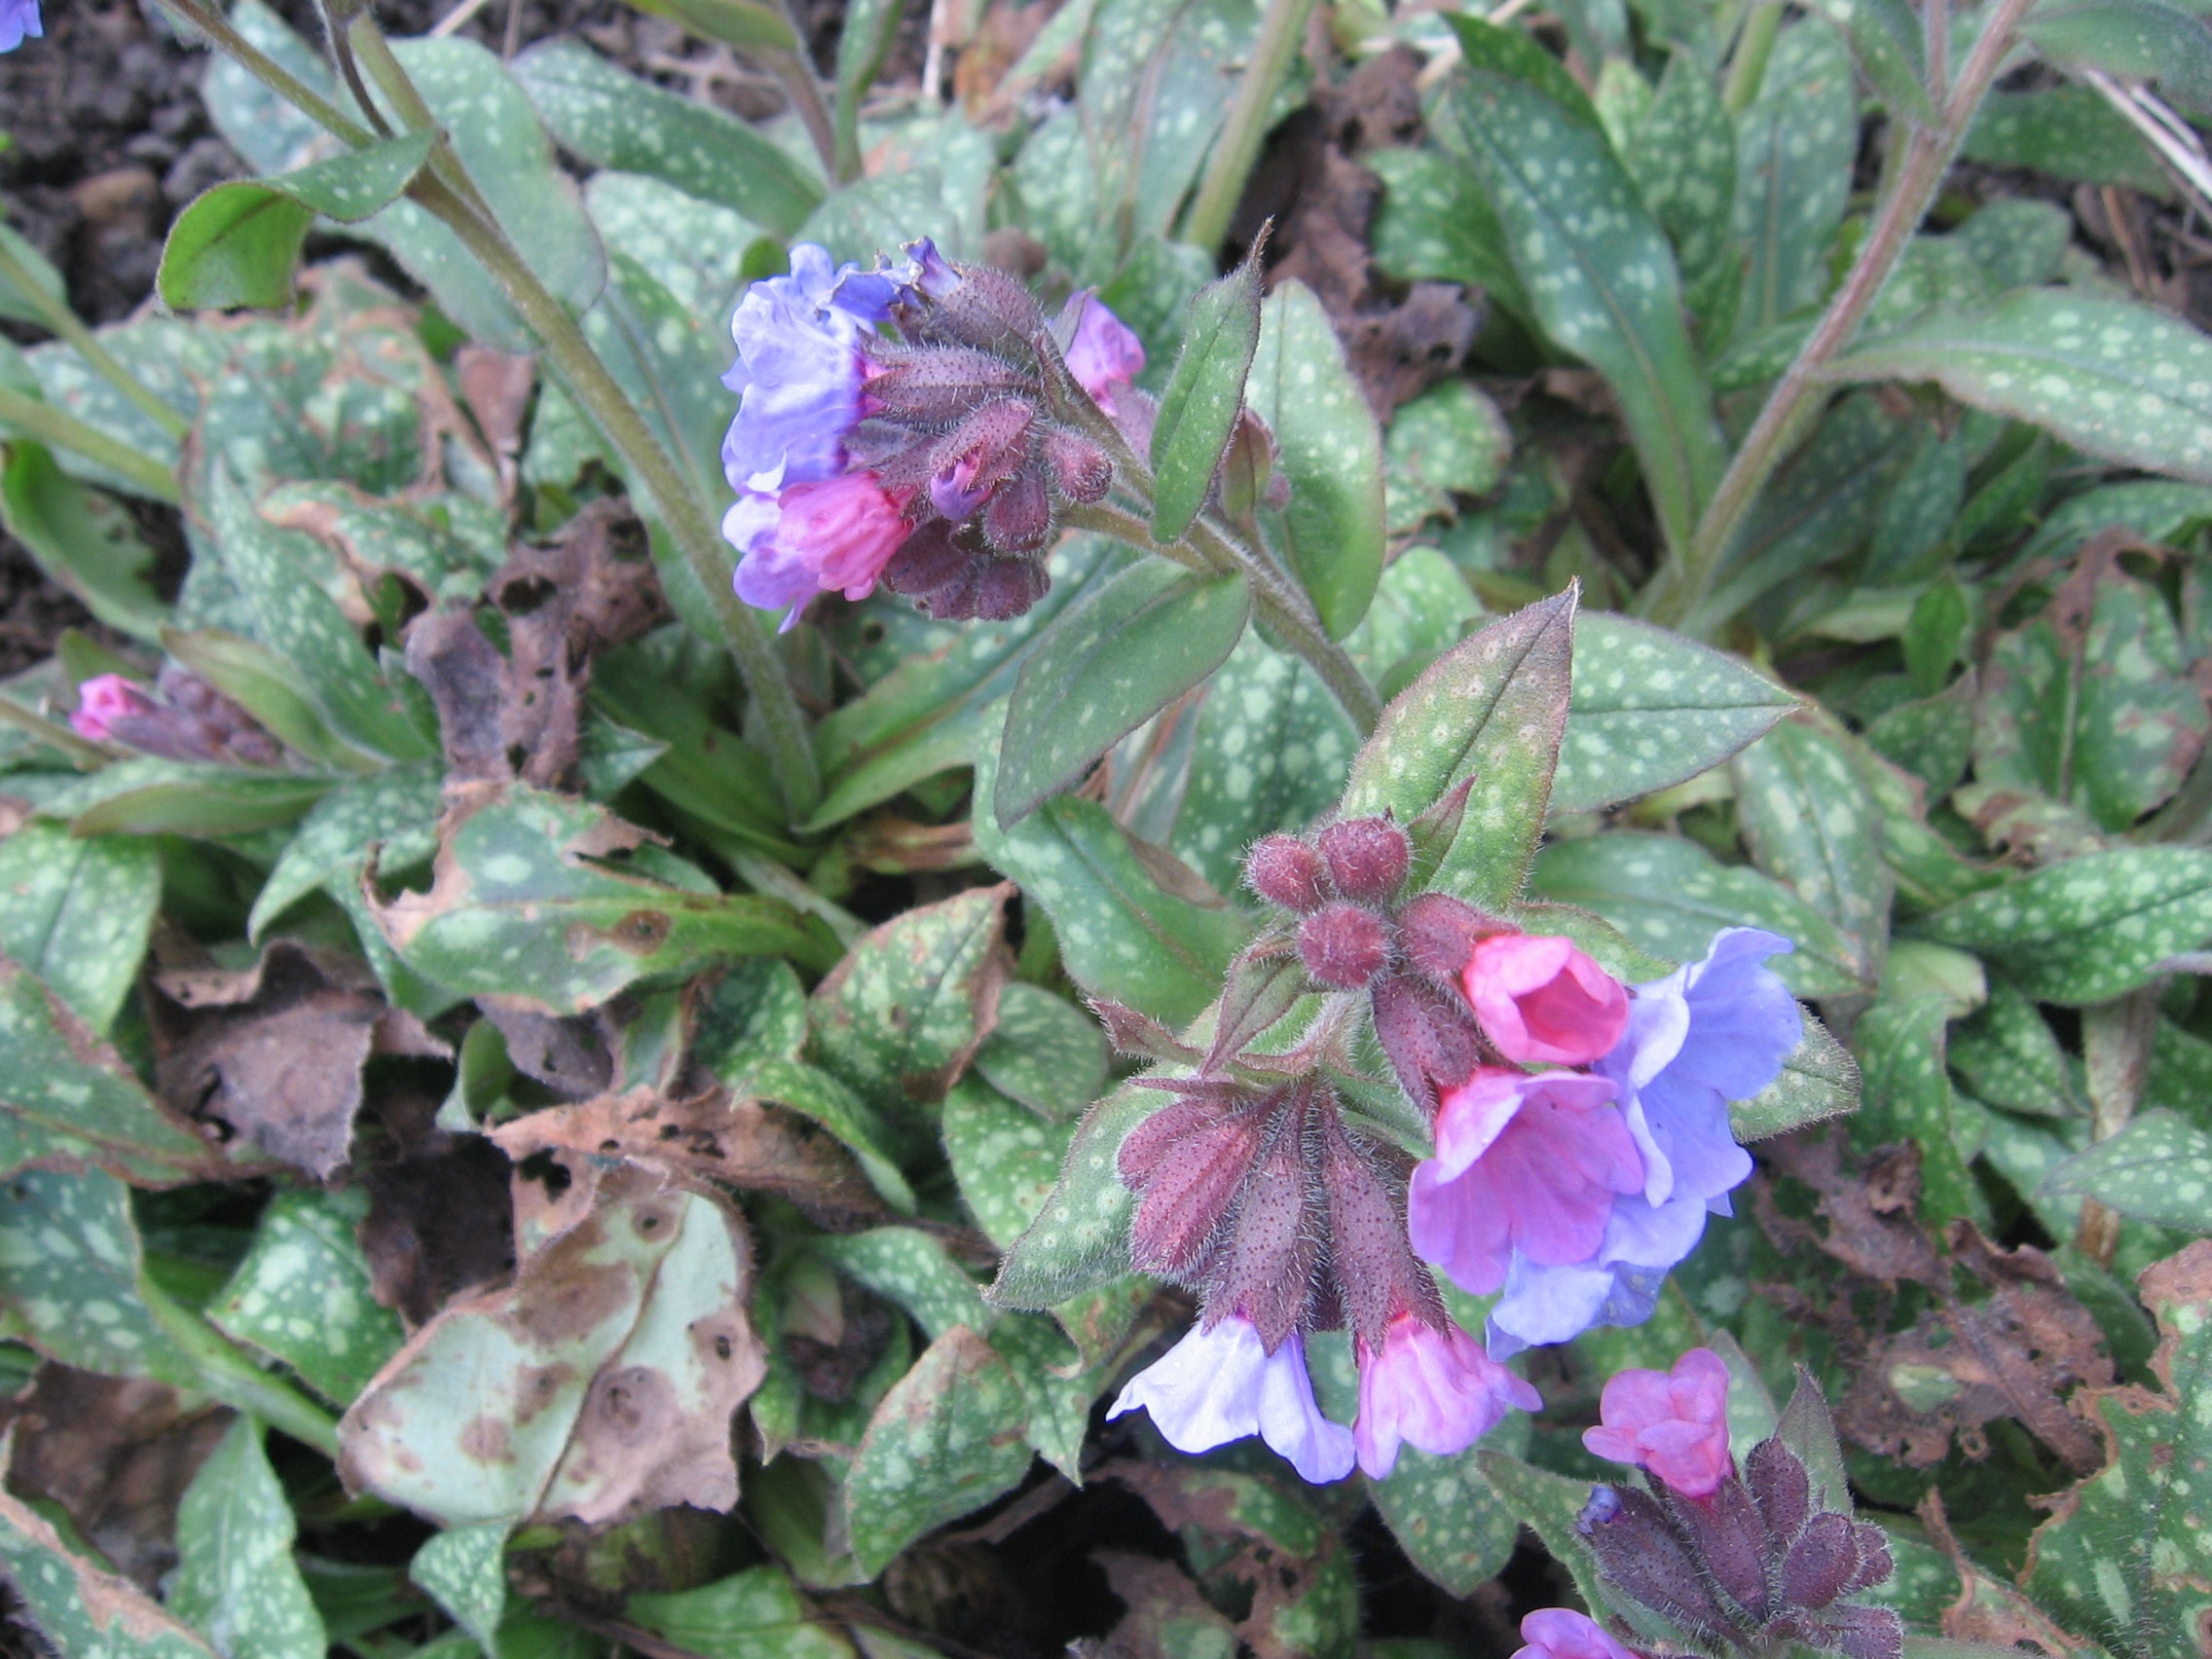 Photograph of the plant Lungwort in flower